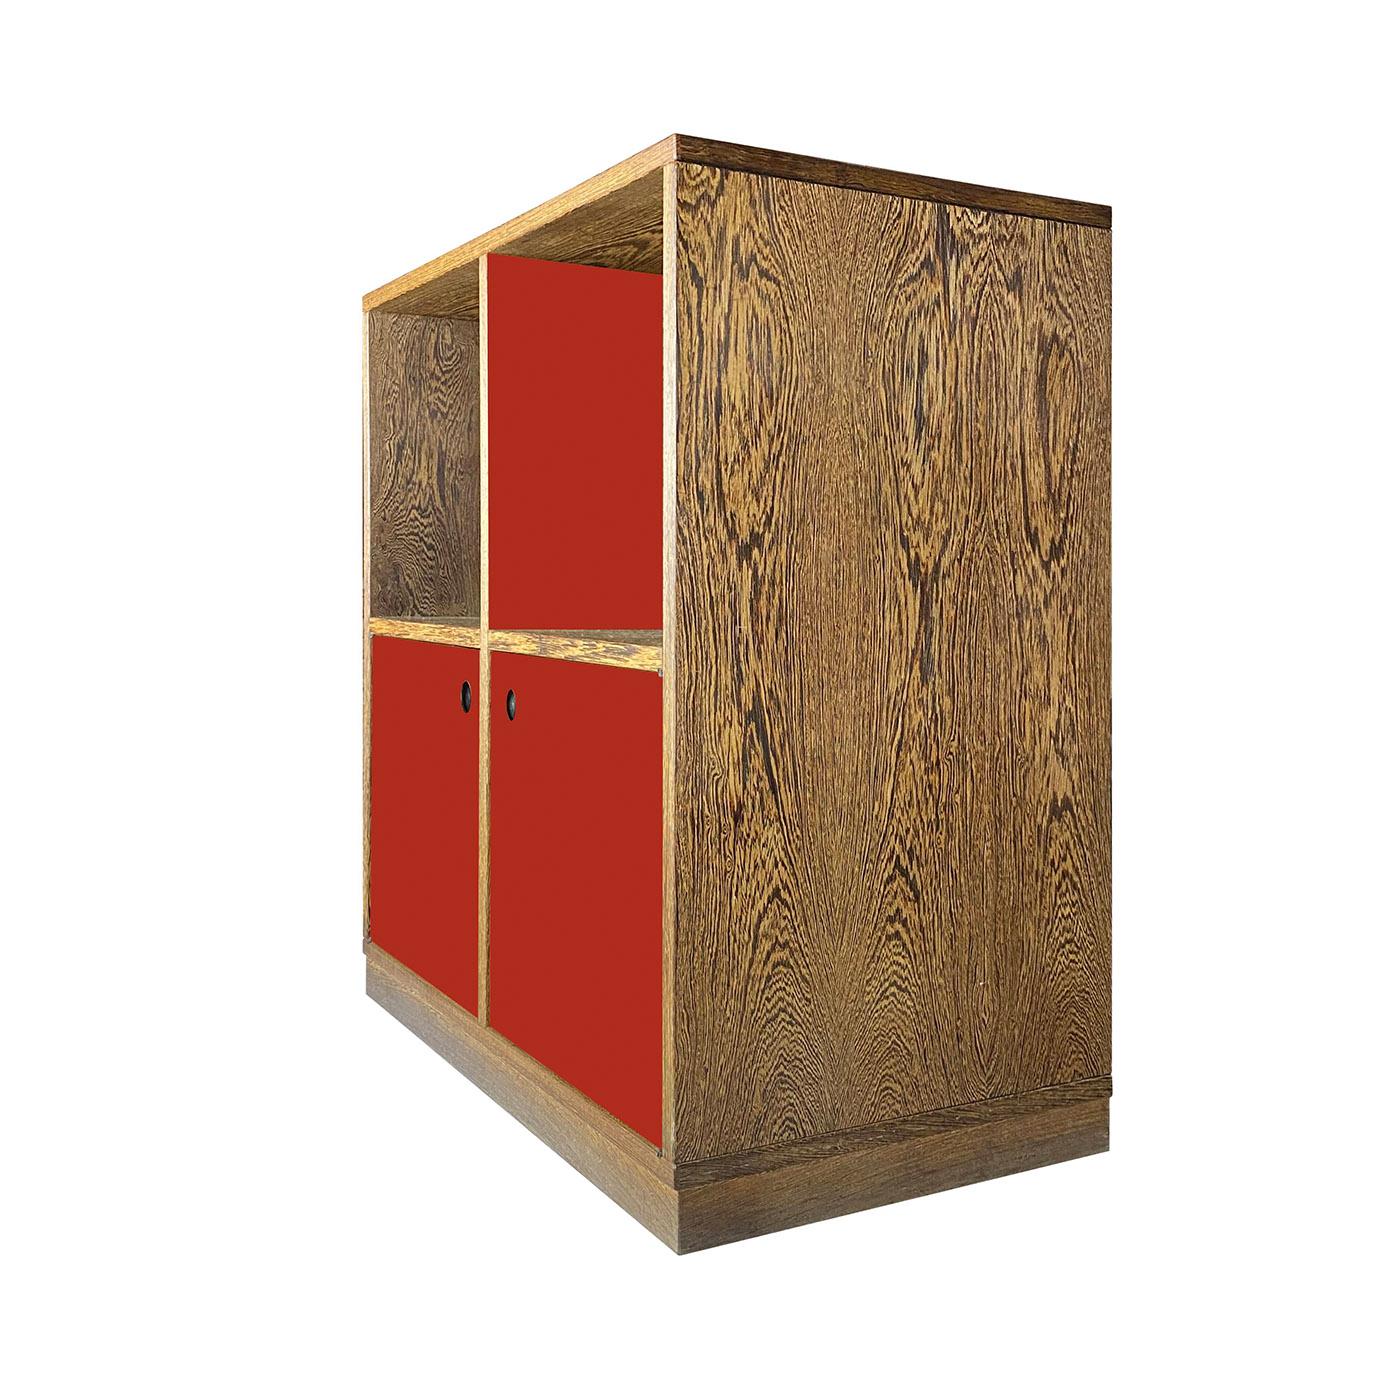 Originally designed in the 1970s, this sideboard is a contemporary take on a vintage classic. Revisited in 2014 by Ferdinando Meccani, it is handmade of wengé wood lacquered with red paint on the two bottom doors.